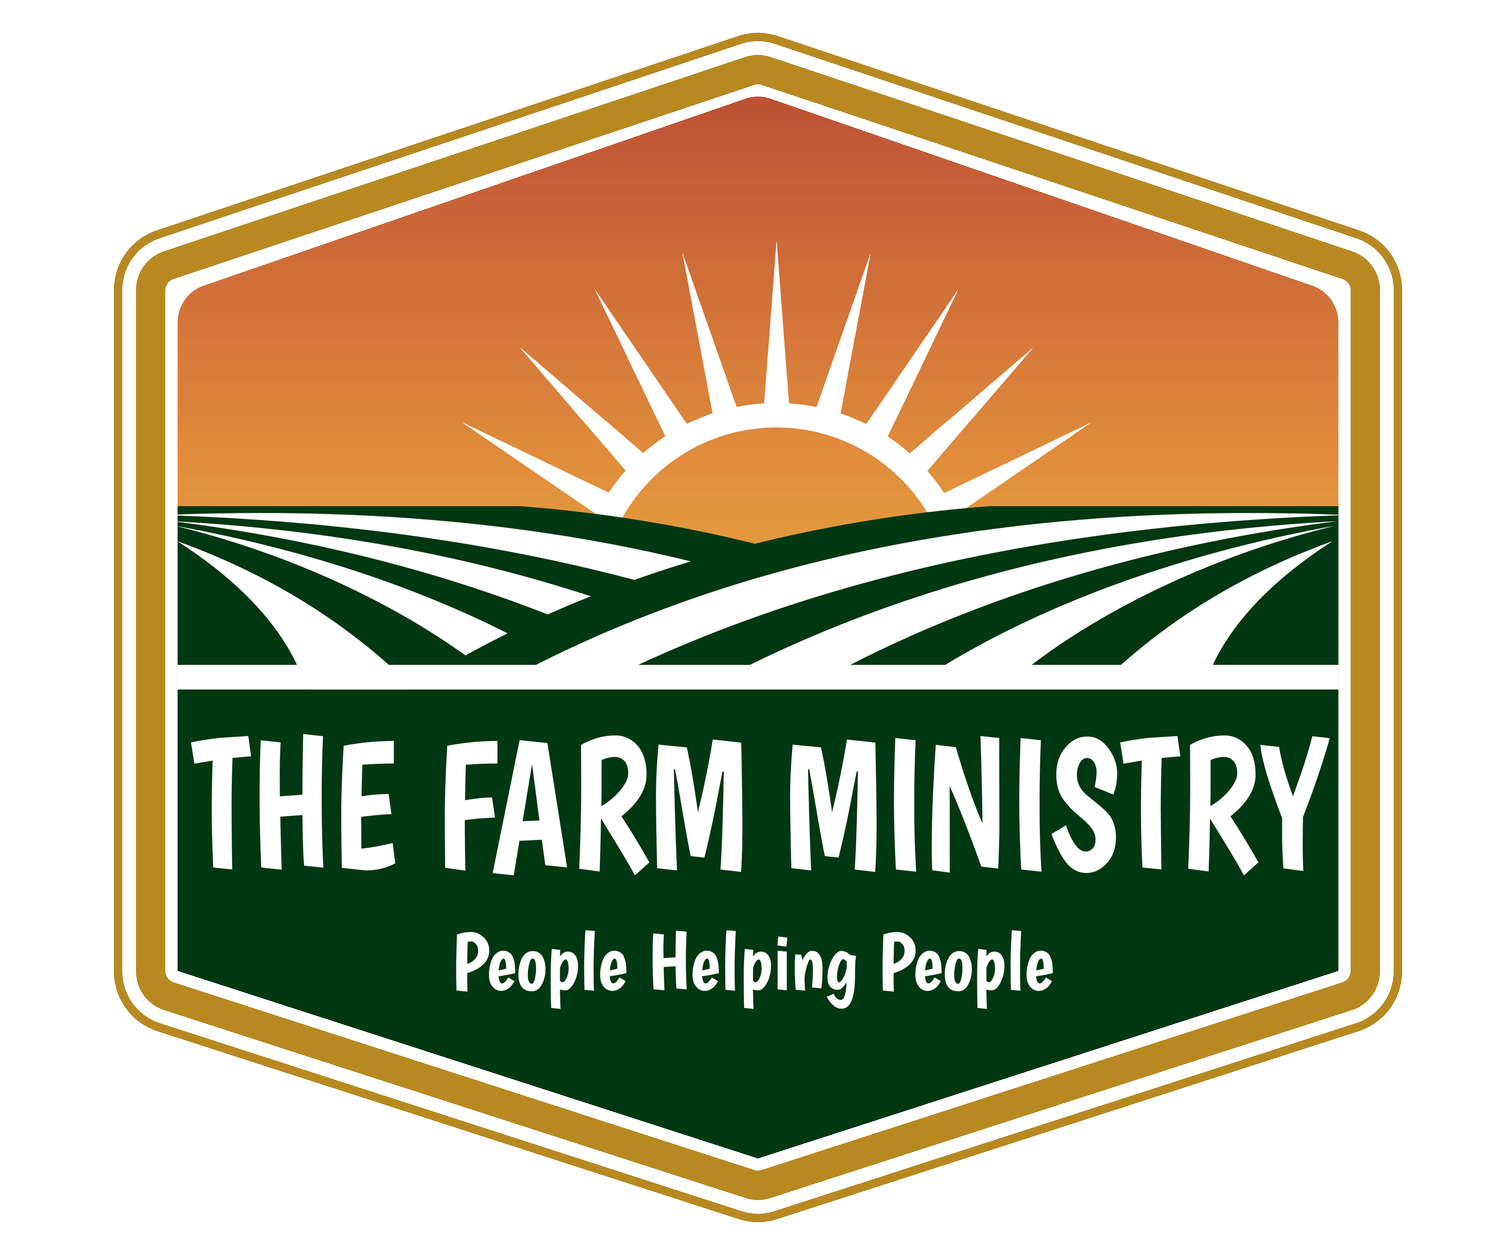 The Farm Ministry